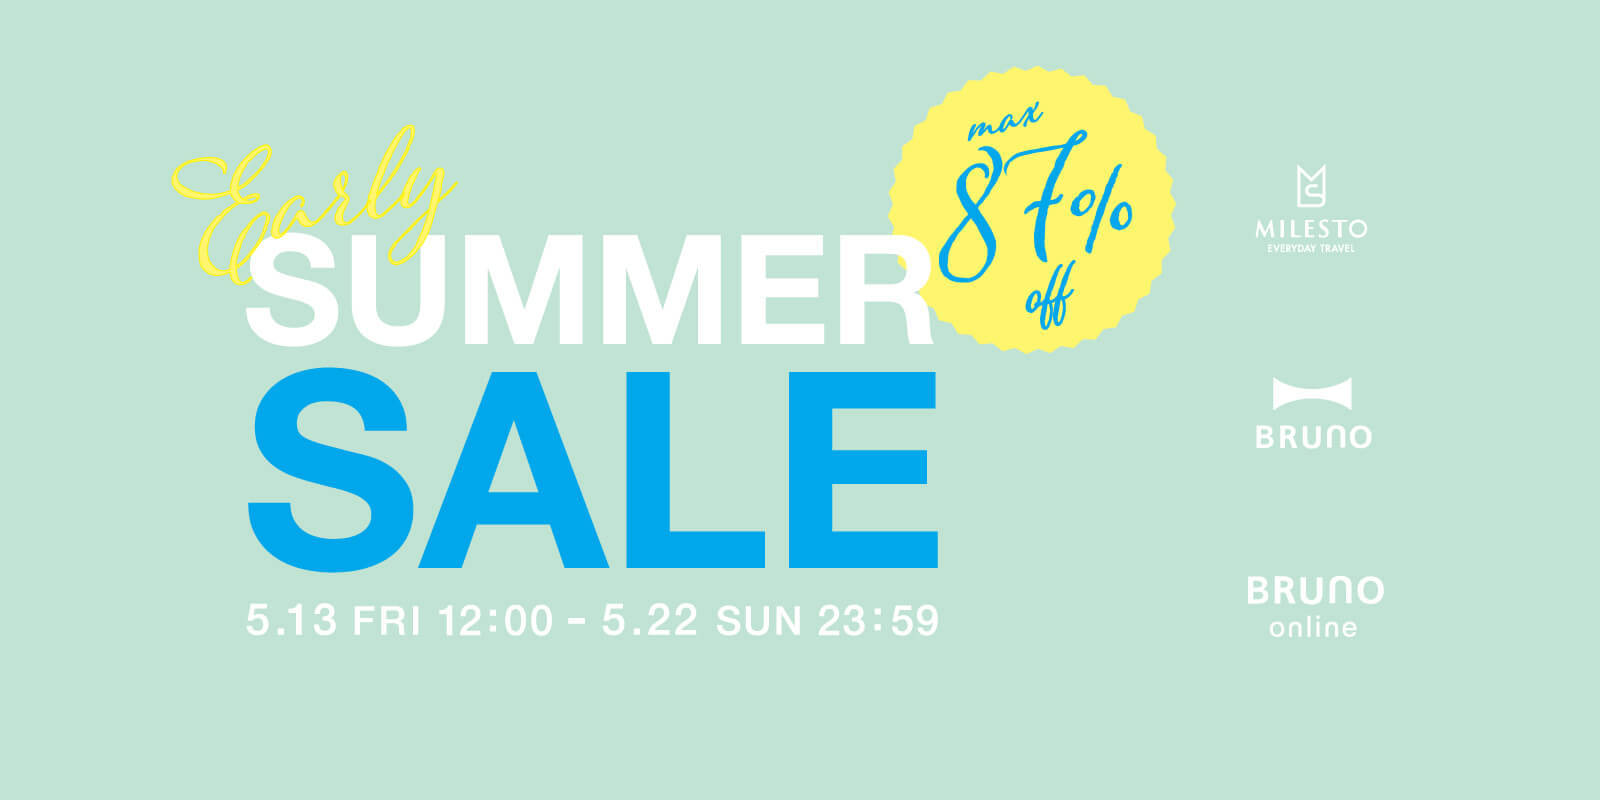 Early Summer SALE